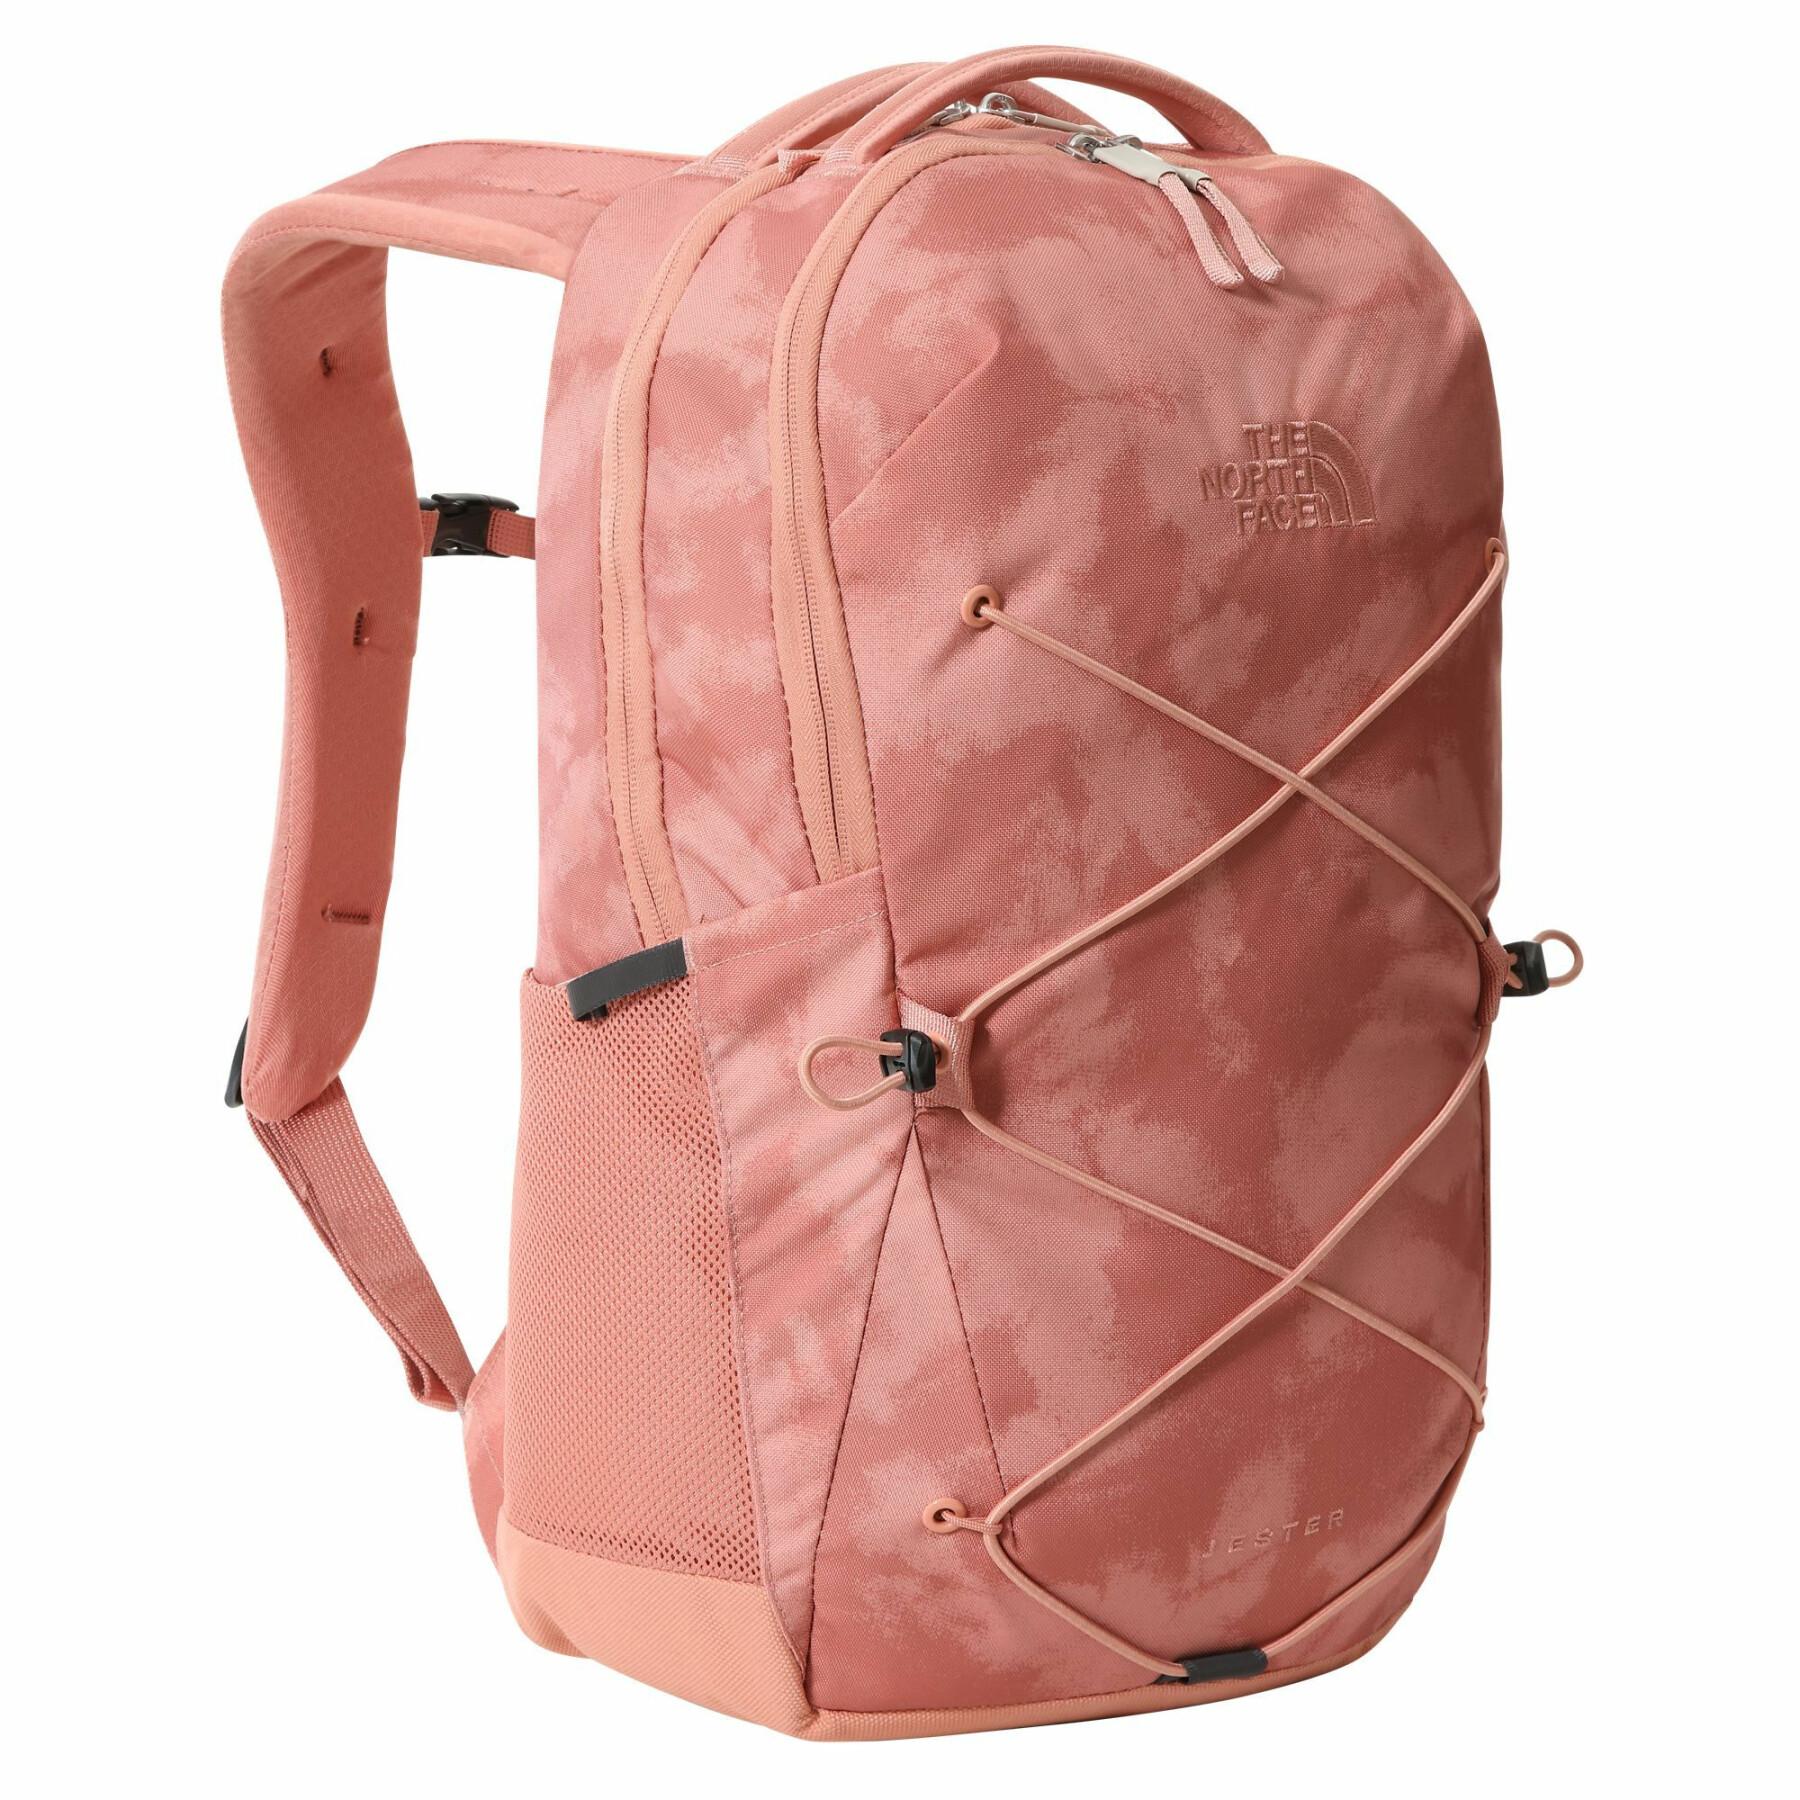 Women's backpack The North Face Jester